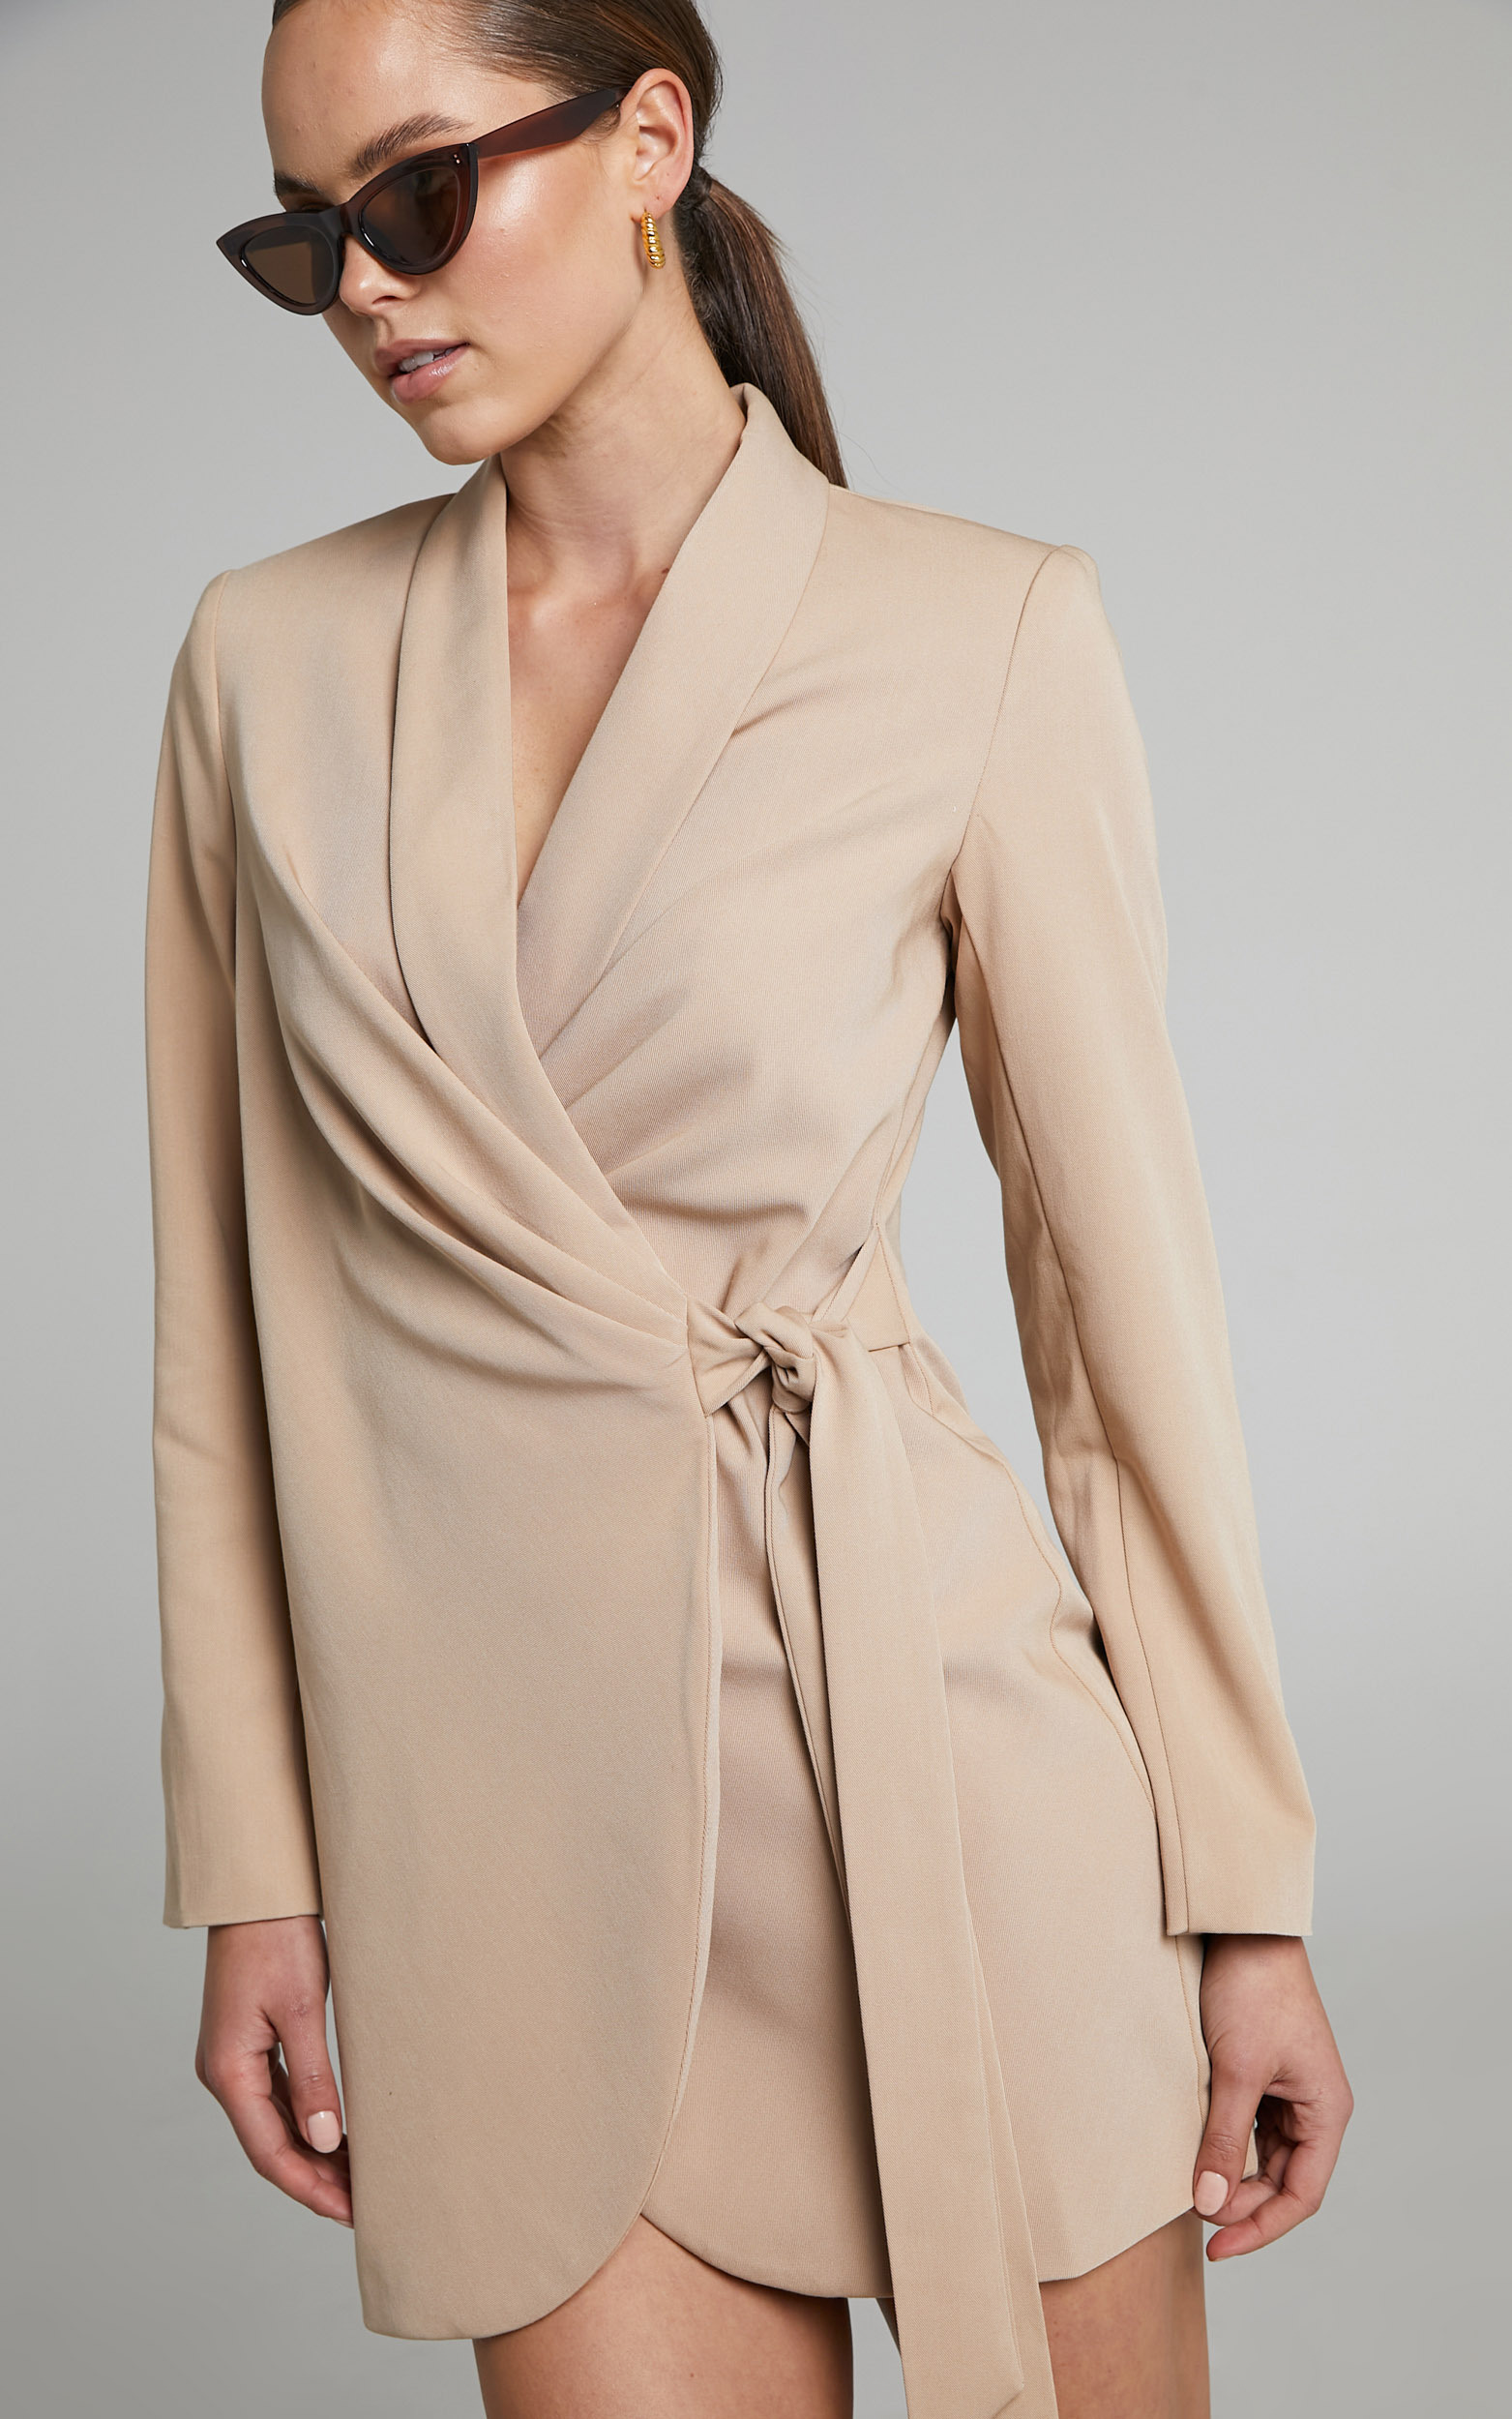 Rosia Wrap Style Blazer Dress in BISCUIT - 12, BRN1, hi-res image number null